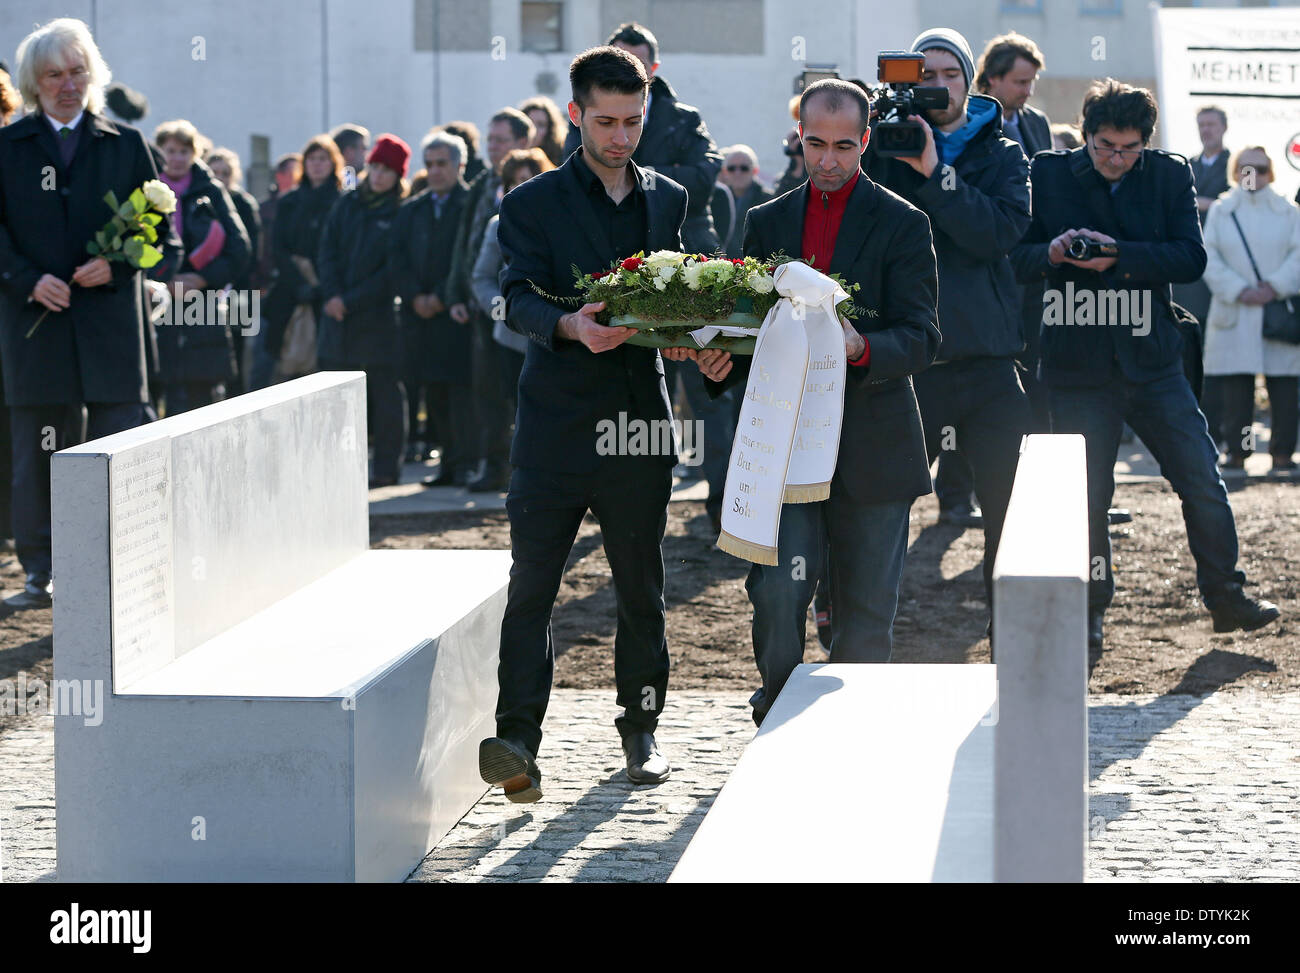 Rostock, Germany. 25th Feb, 2014. Brothers of murder victim Mehmet Turgut, Mustafa (L) and Yunus Turgut, lay a wreath at the memorial for Mehmet Turgut, a presumed victim of far-right German terrorist group National Socialist Underground (NSU) in Rostock, Germany, 25 February 2014. Exactly ten years after owner of a Turkish take-away, Turgut, was murdered, Rostock has unveiled a memorial. Photo: AXEL HEIMKEN/DPA/Alamy Live News Stock Photo